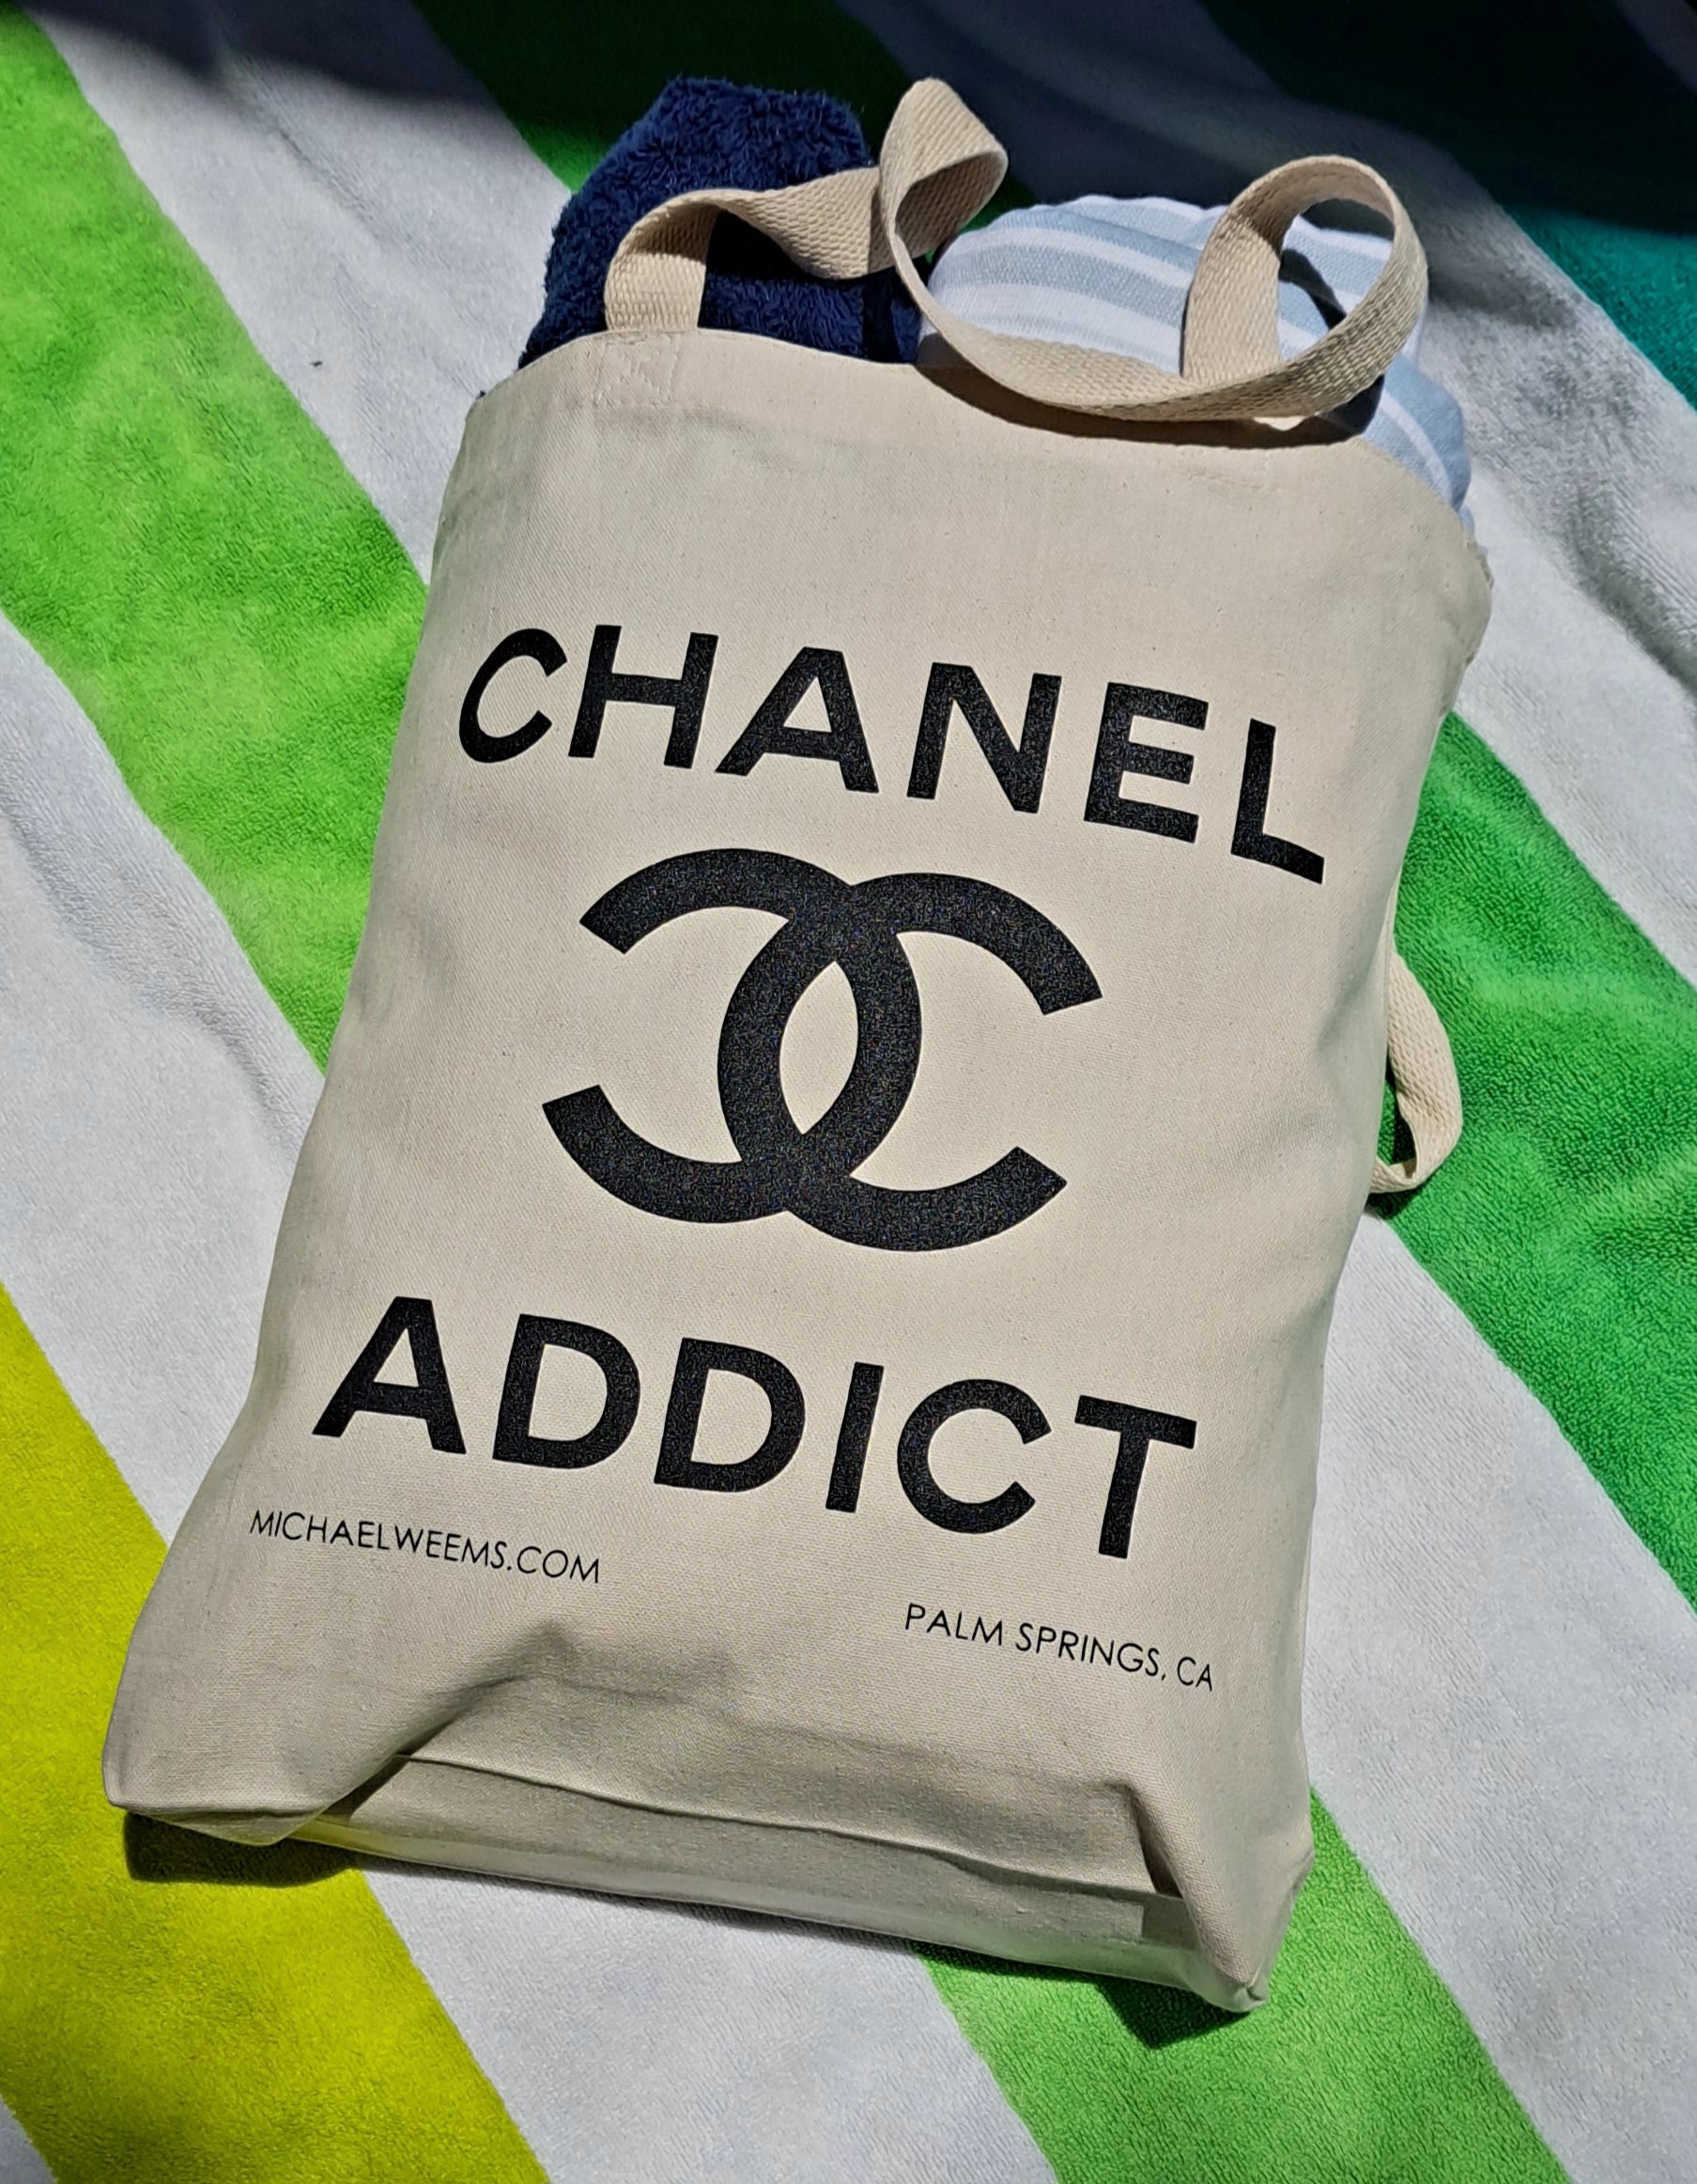 my other bag is chanel tote bag